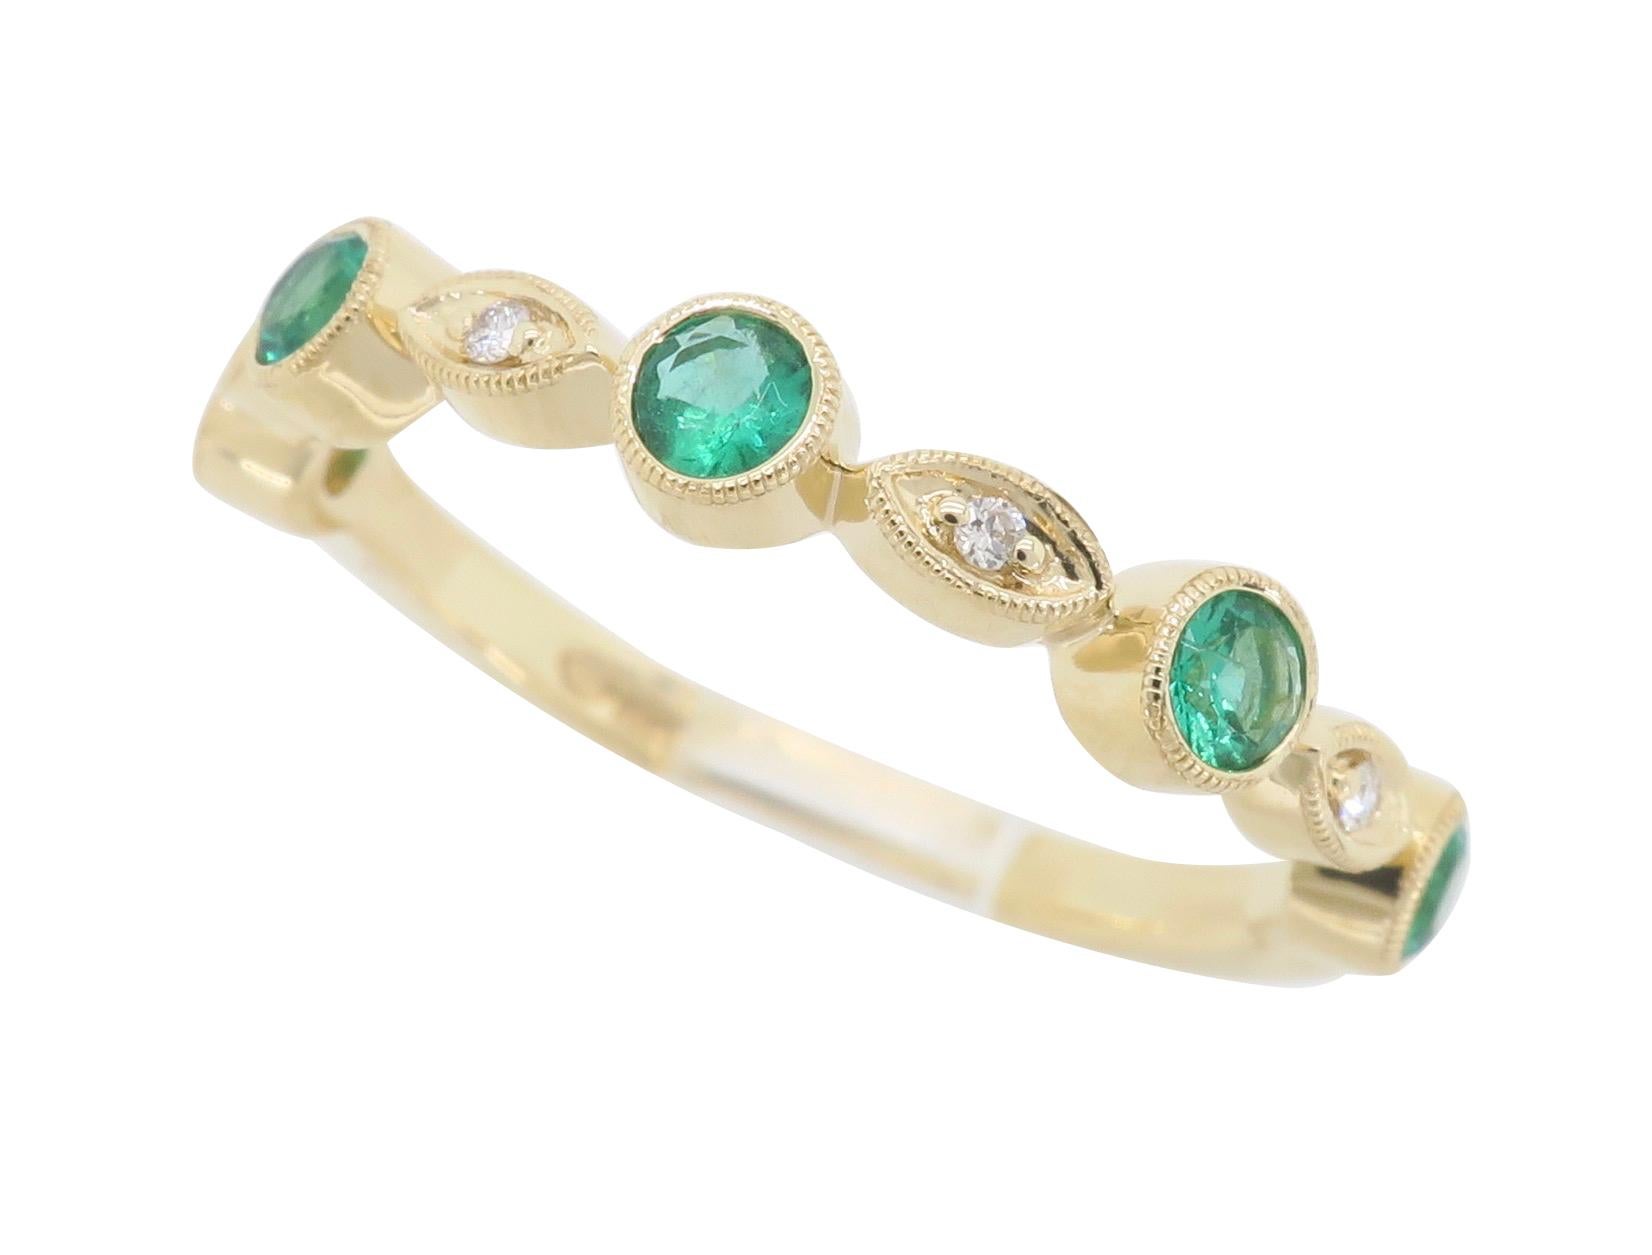 Mil-grain detailed band with alternating Round Cut Emeralds and Round Brilliant Cut Diamonds crafted in 14K yellow gold.

Gemstone: Emerald & Diamond
Gemstone Carat Weight: 5 Approximately 2.6mm Round Cut Emeralds
Diamond Carat Weight: 